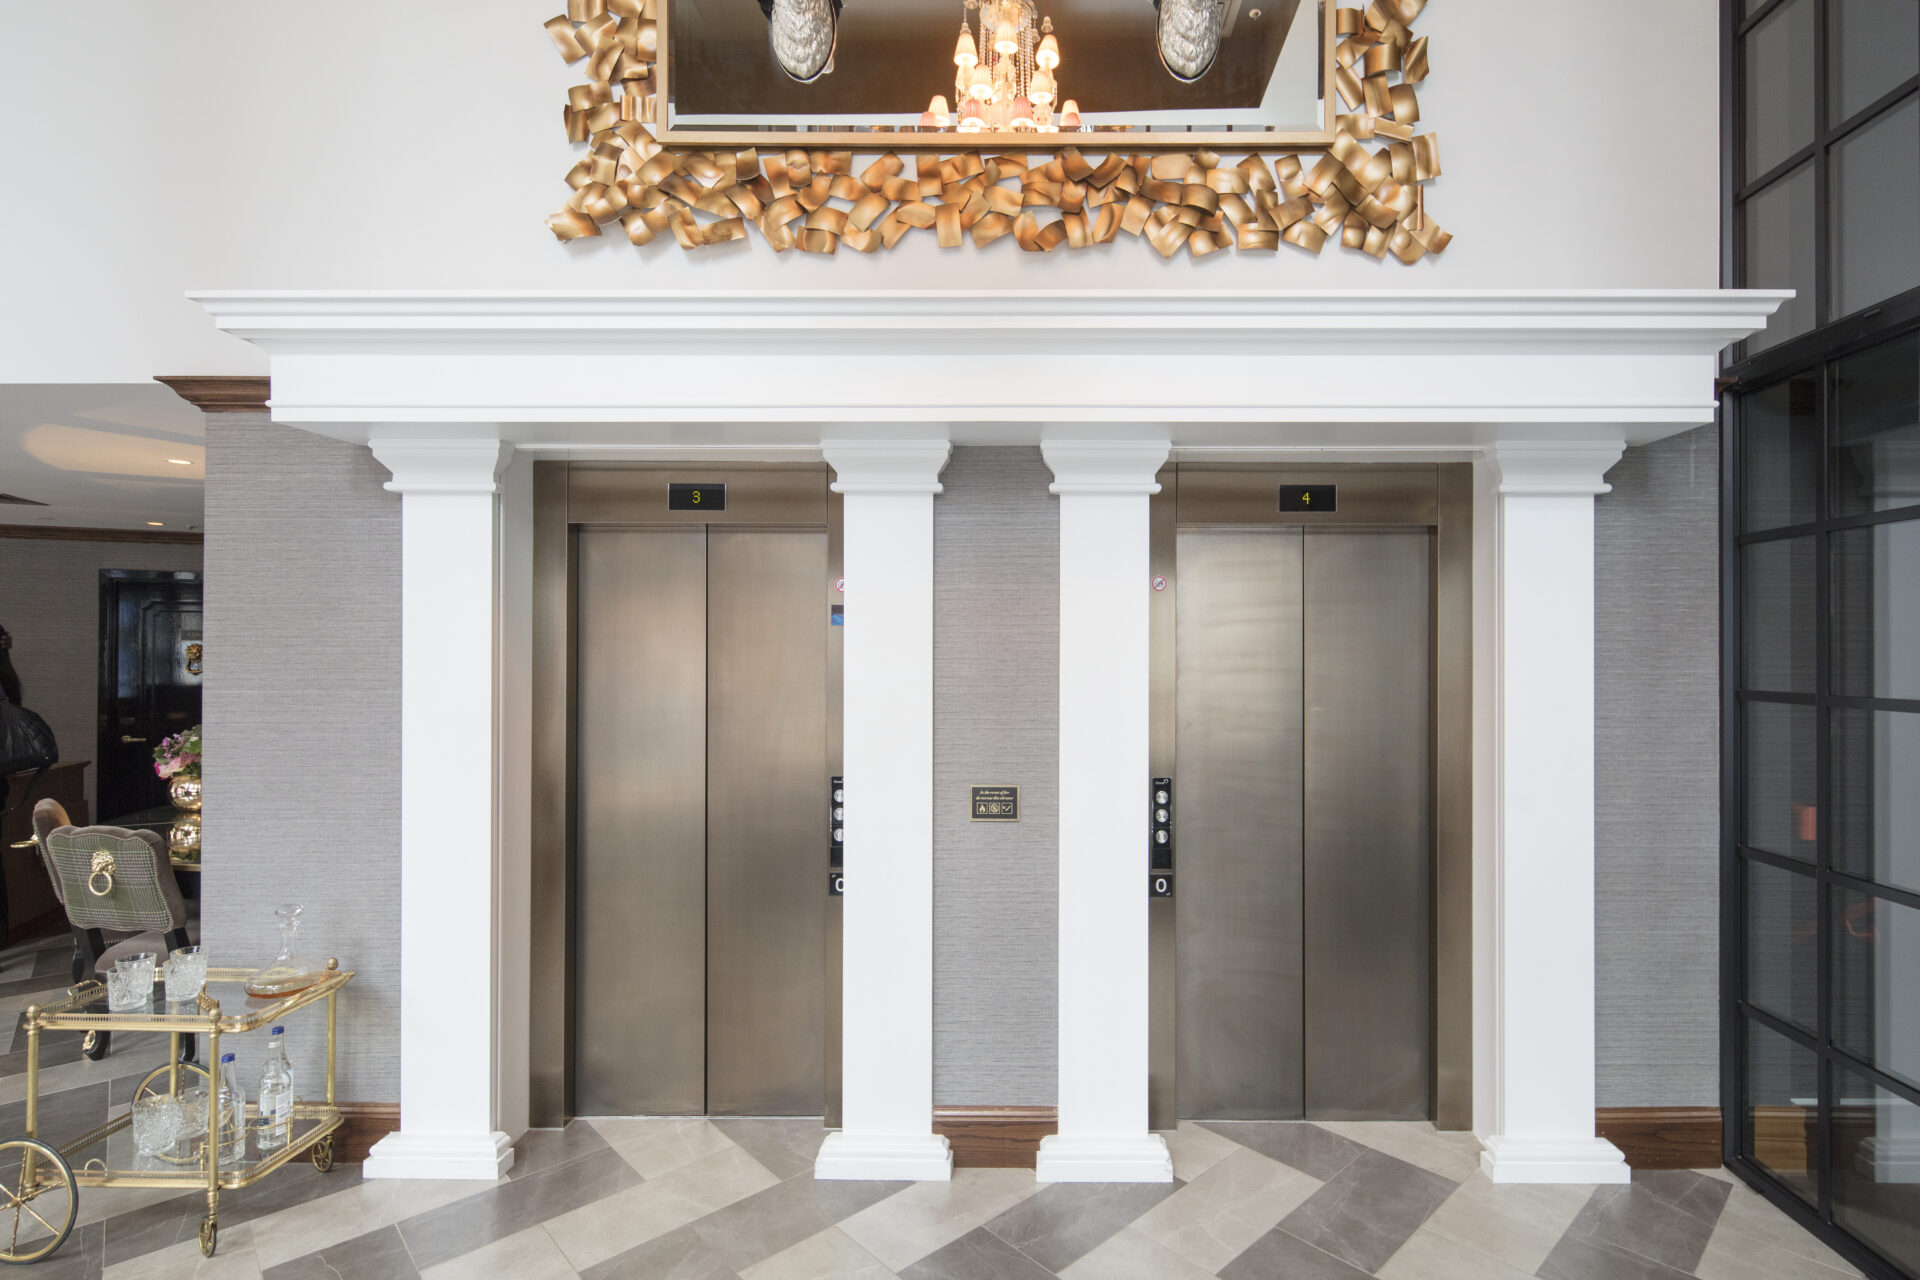 Two elevators in a room with pillars and a mirror.